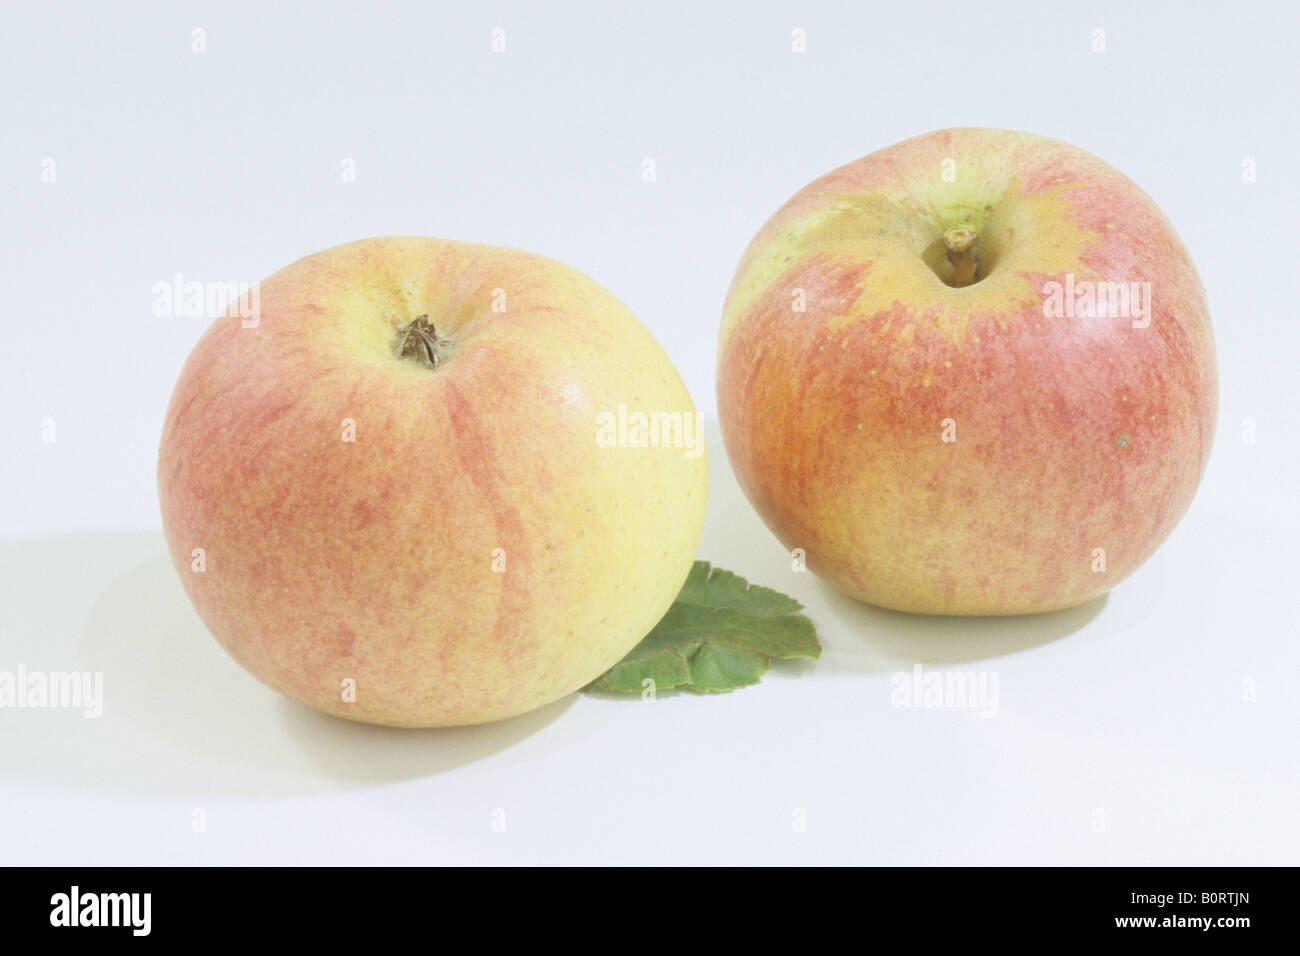 Domestic Apple (Malus domestica), variety: Berlepsch, two apples, studio picture Stock Photo